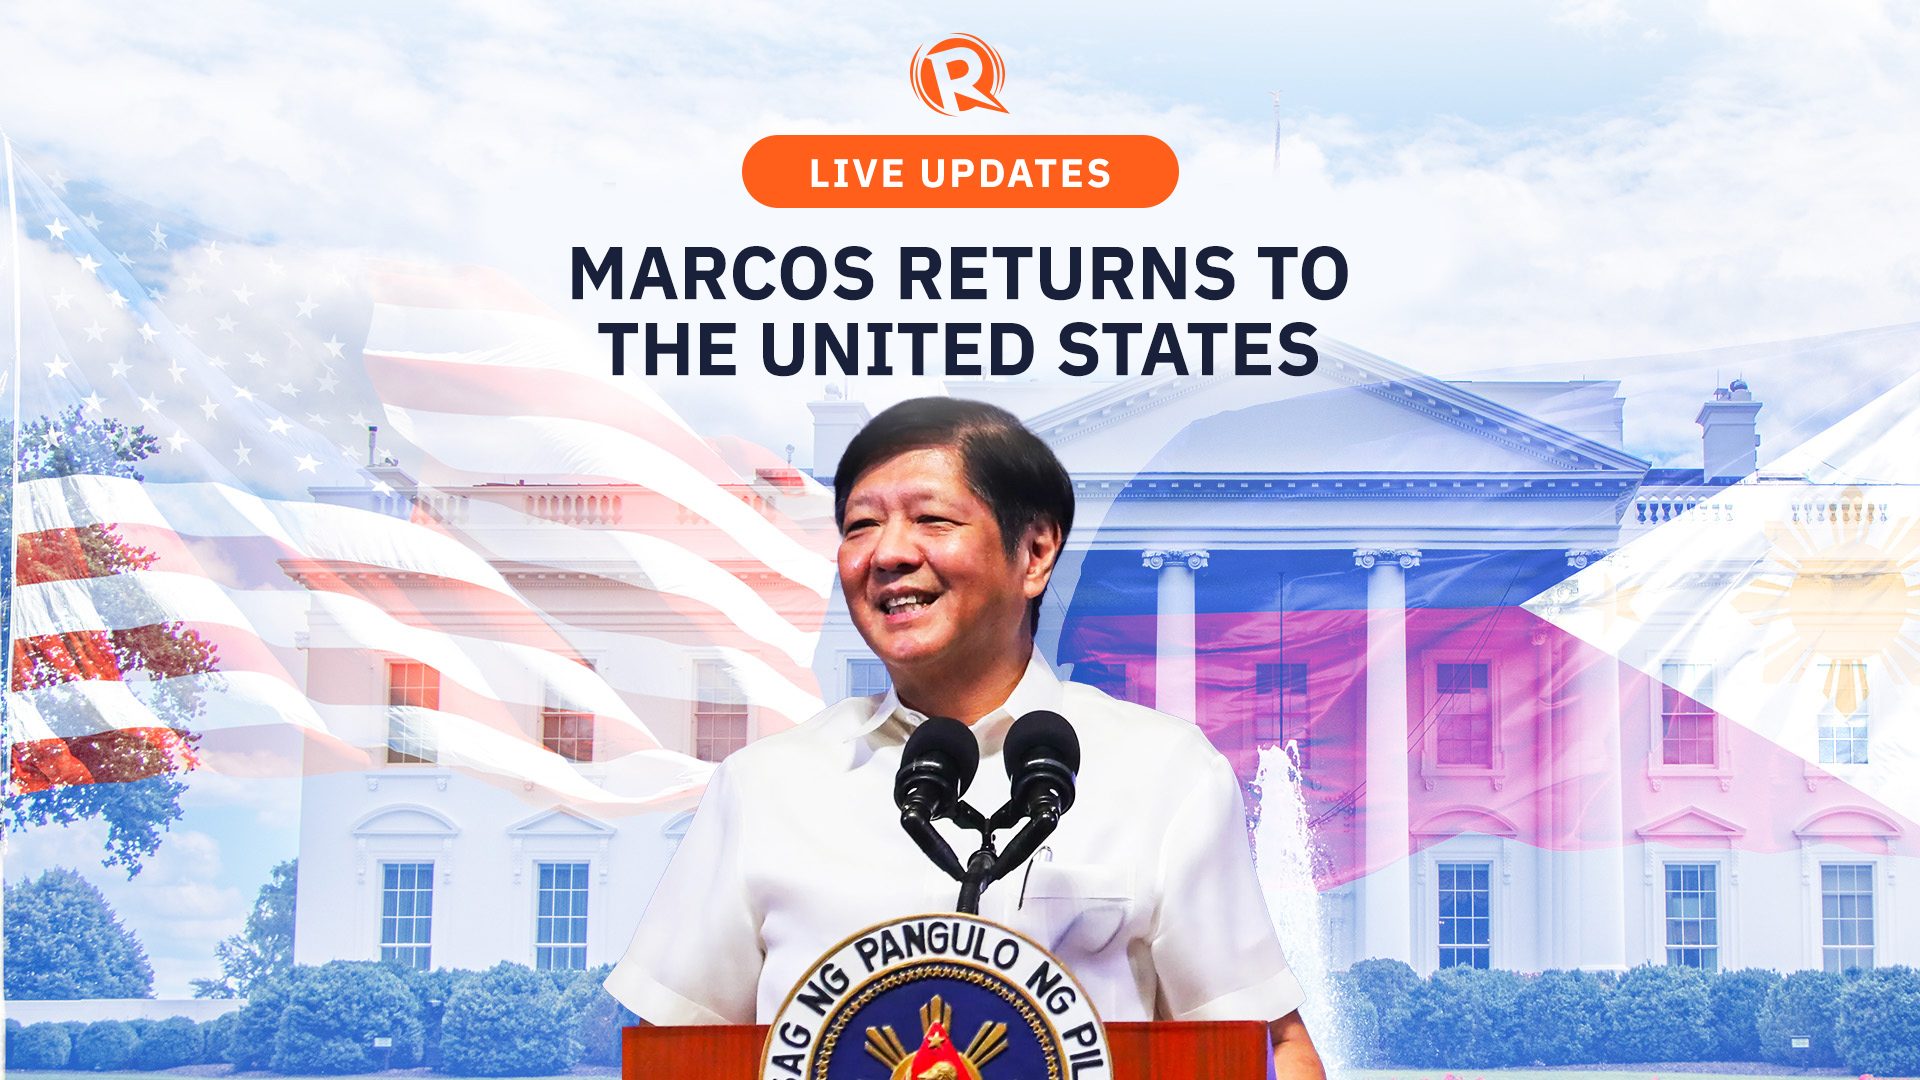 LIVE UPDATES: President Marcos’ official visit to the United States